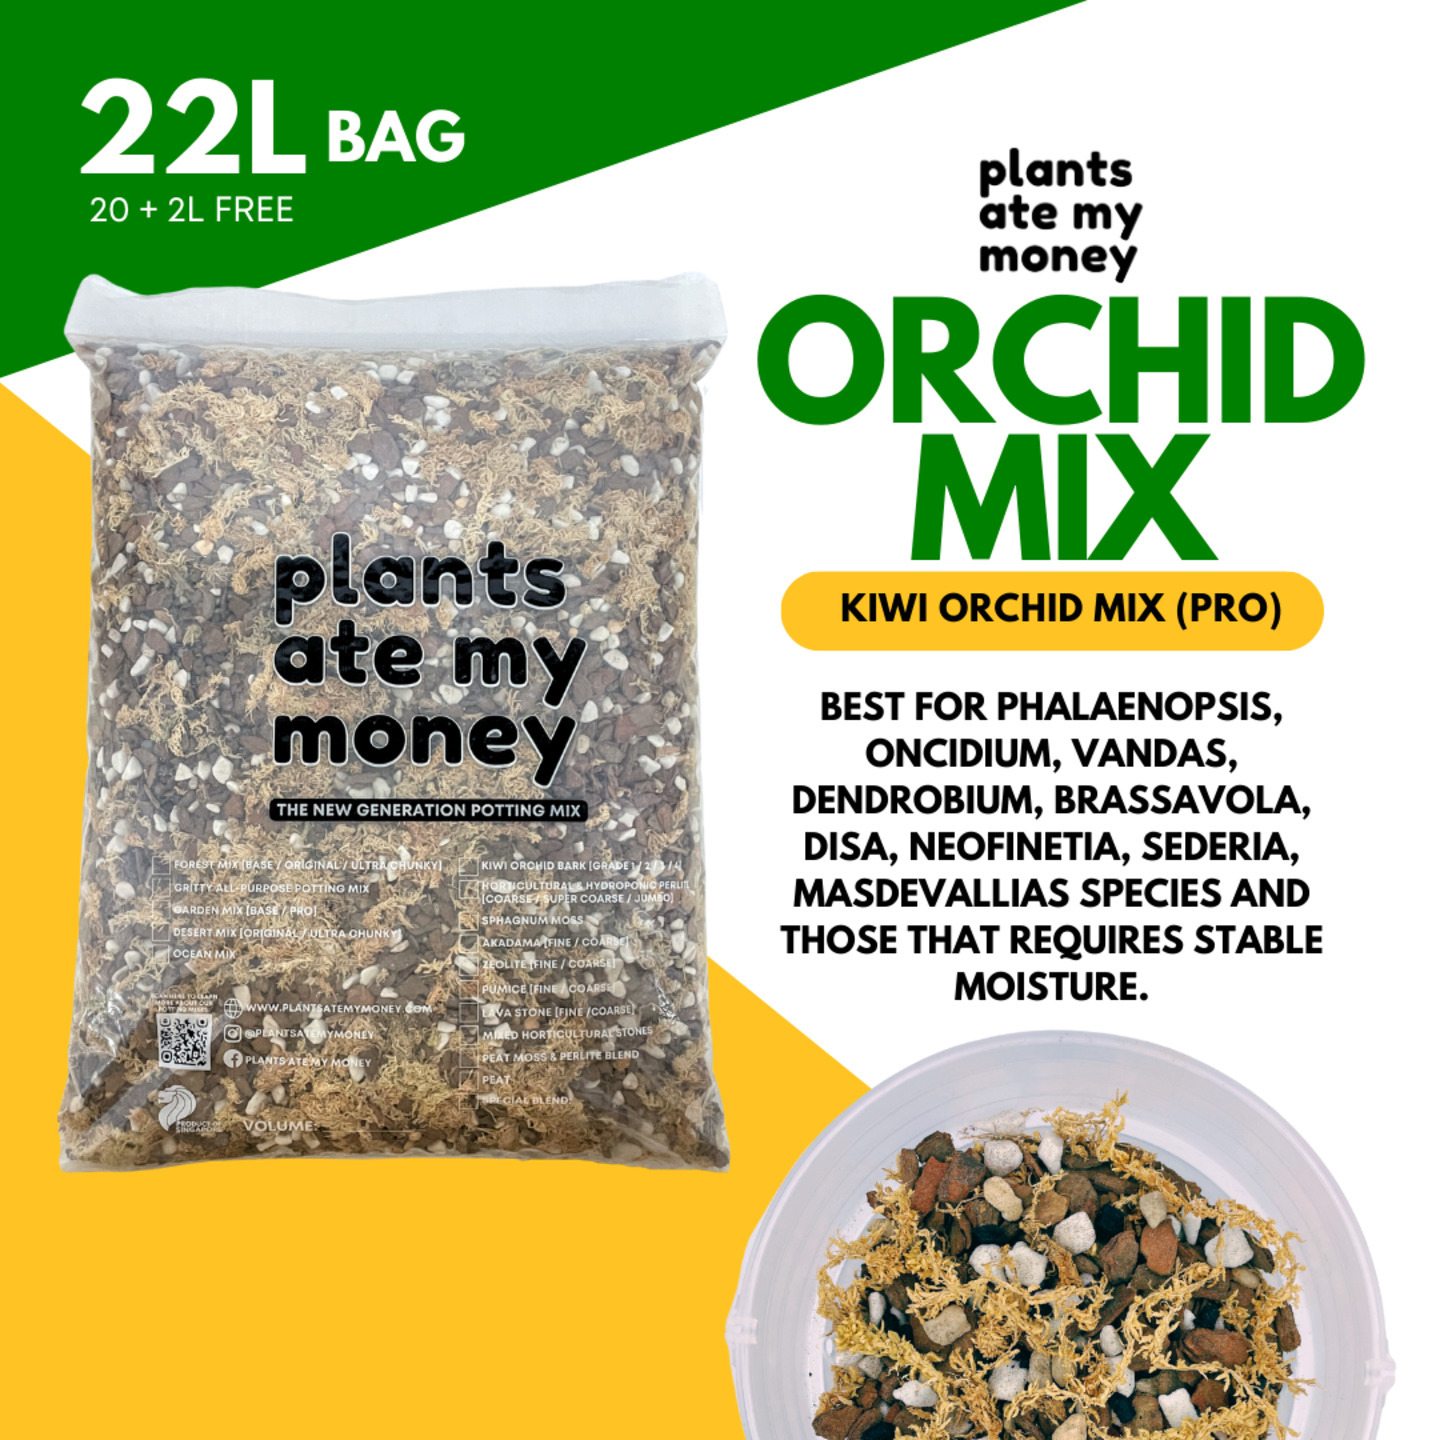 Kiwi Orchid Mix - Pro 22L - Premium Potting Mix made for Orchids, Cattleyas and Phalaenopsis